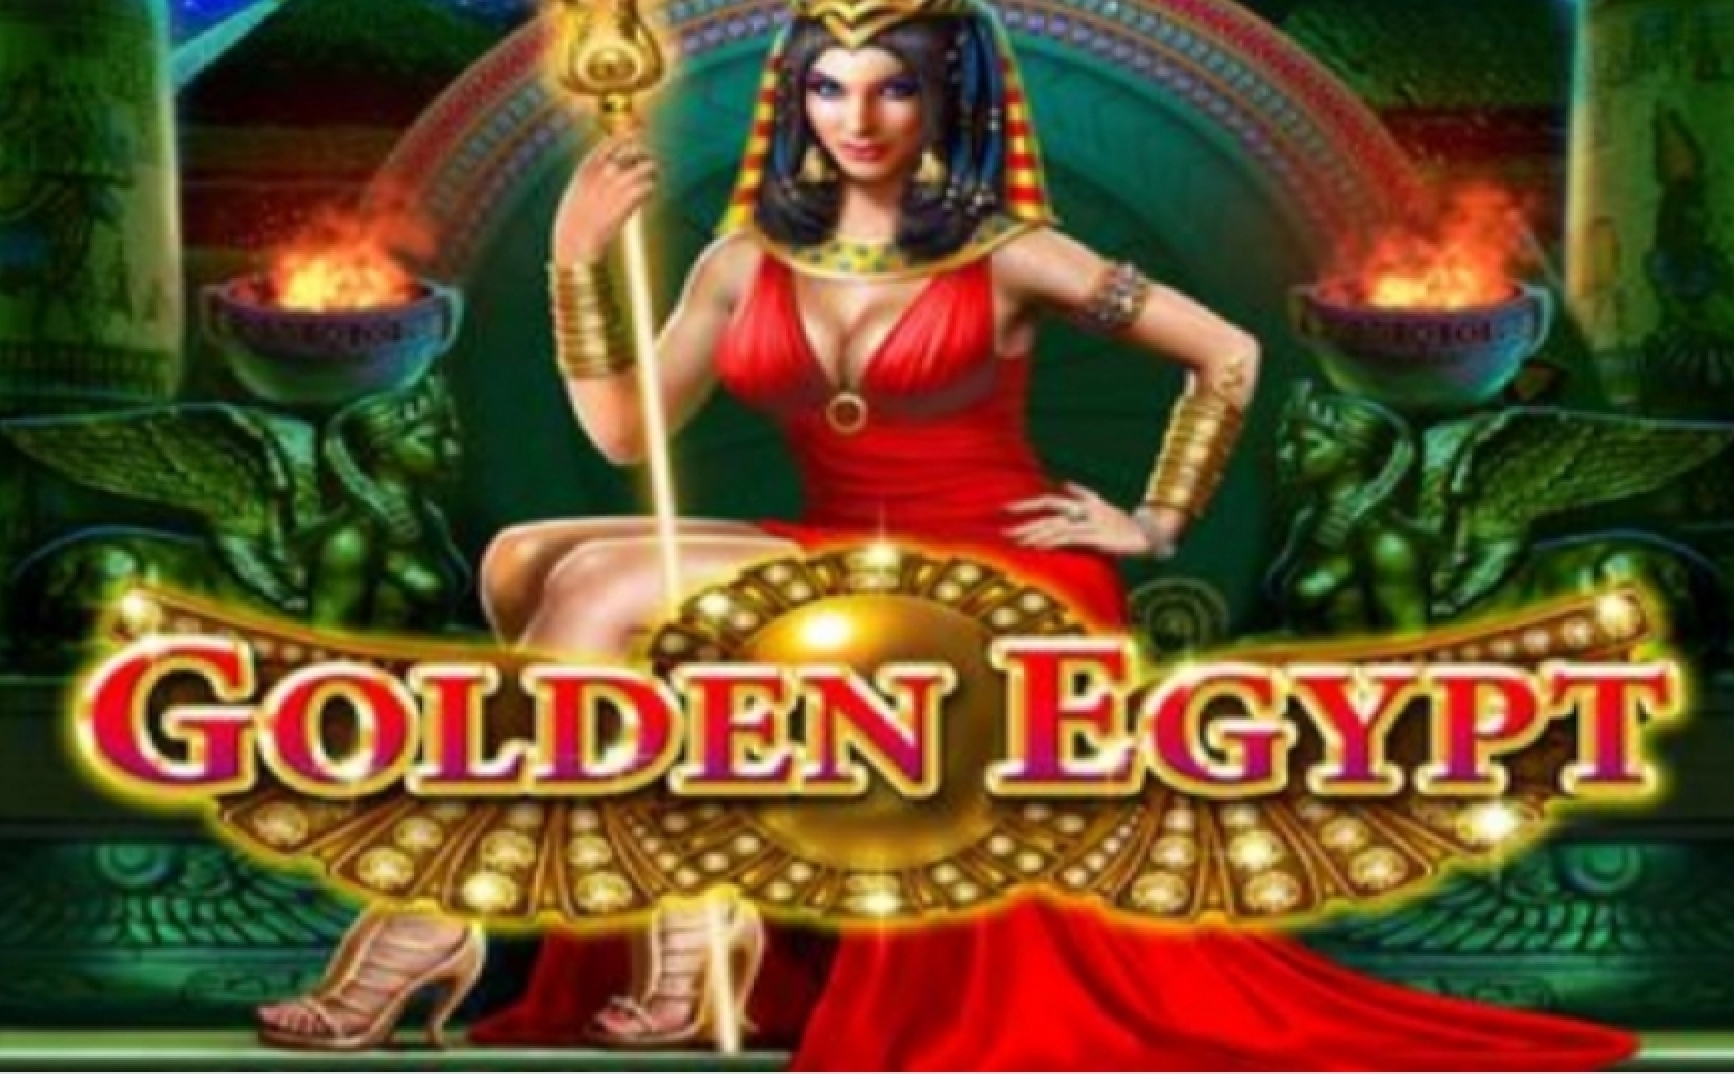 The Golden Egypt Online Slot Demo Game by Octavian Gaming